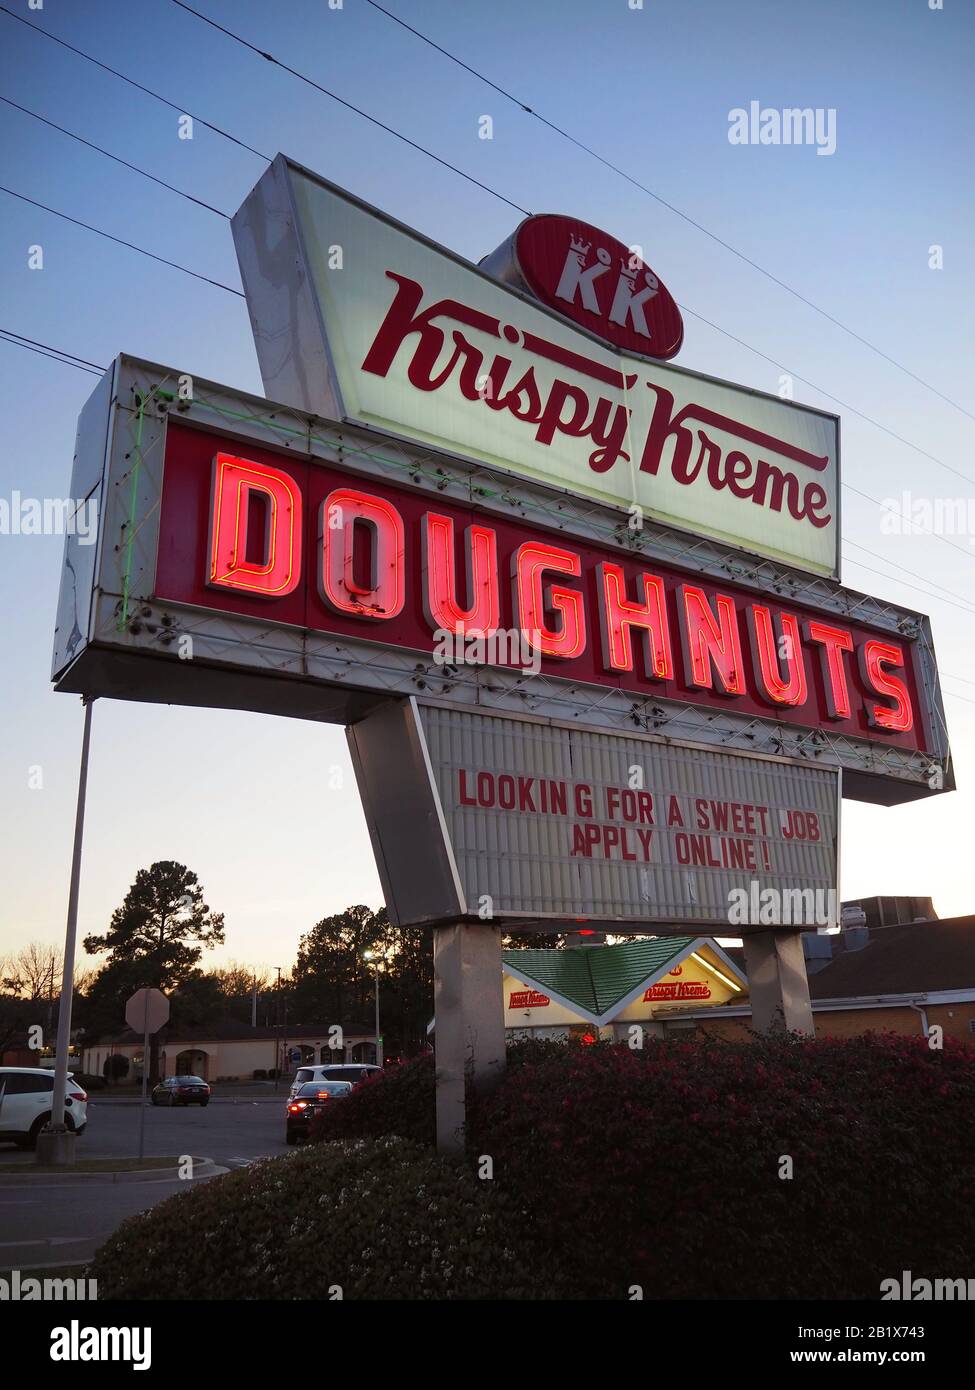 SAVANNAH, GA - FEBRUARY 22, 2020: A red and white lighted neon sign for Krispy Kreme donuts glows on a street corner at dusk in Savannah, Georgia. Stock Photo